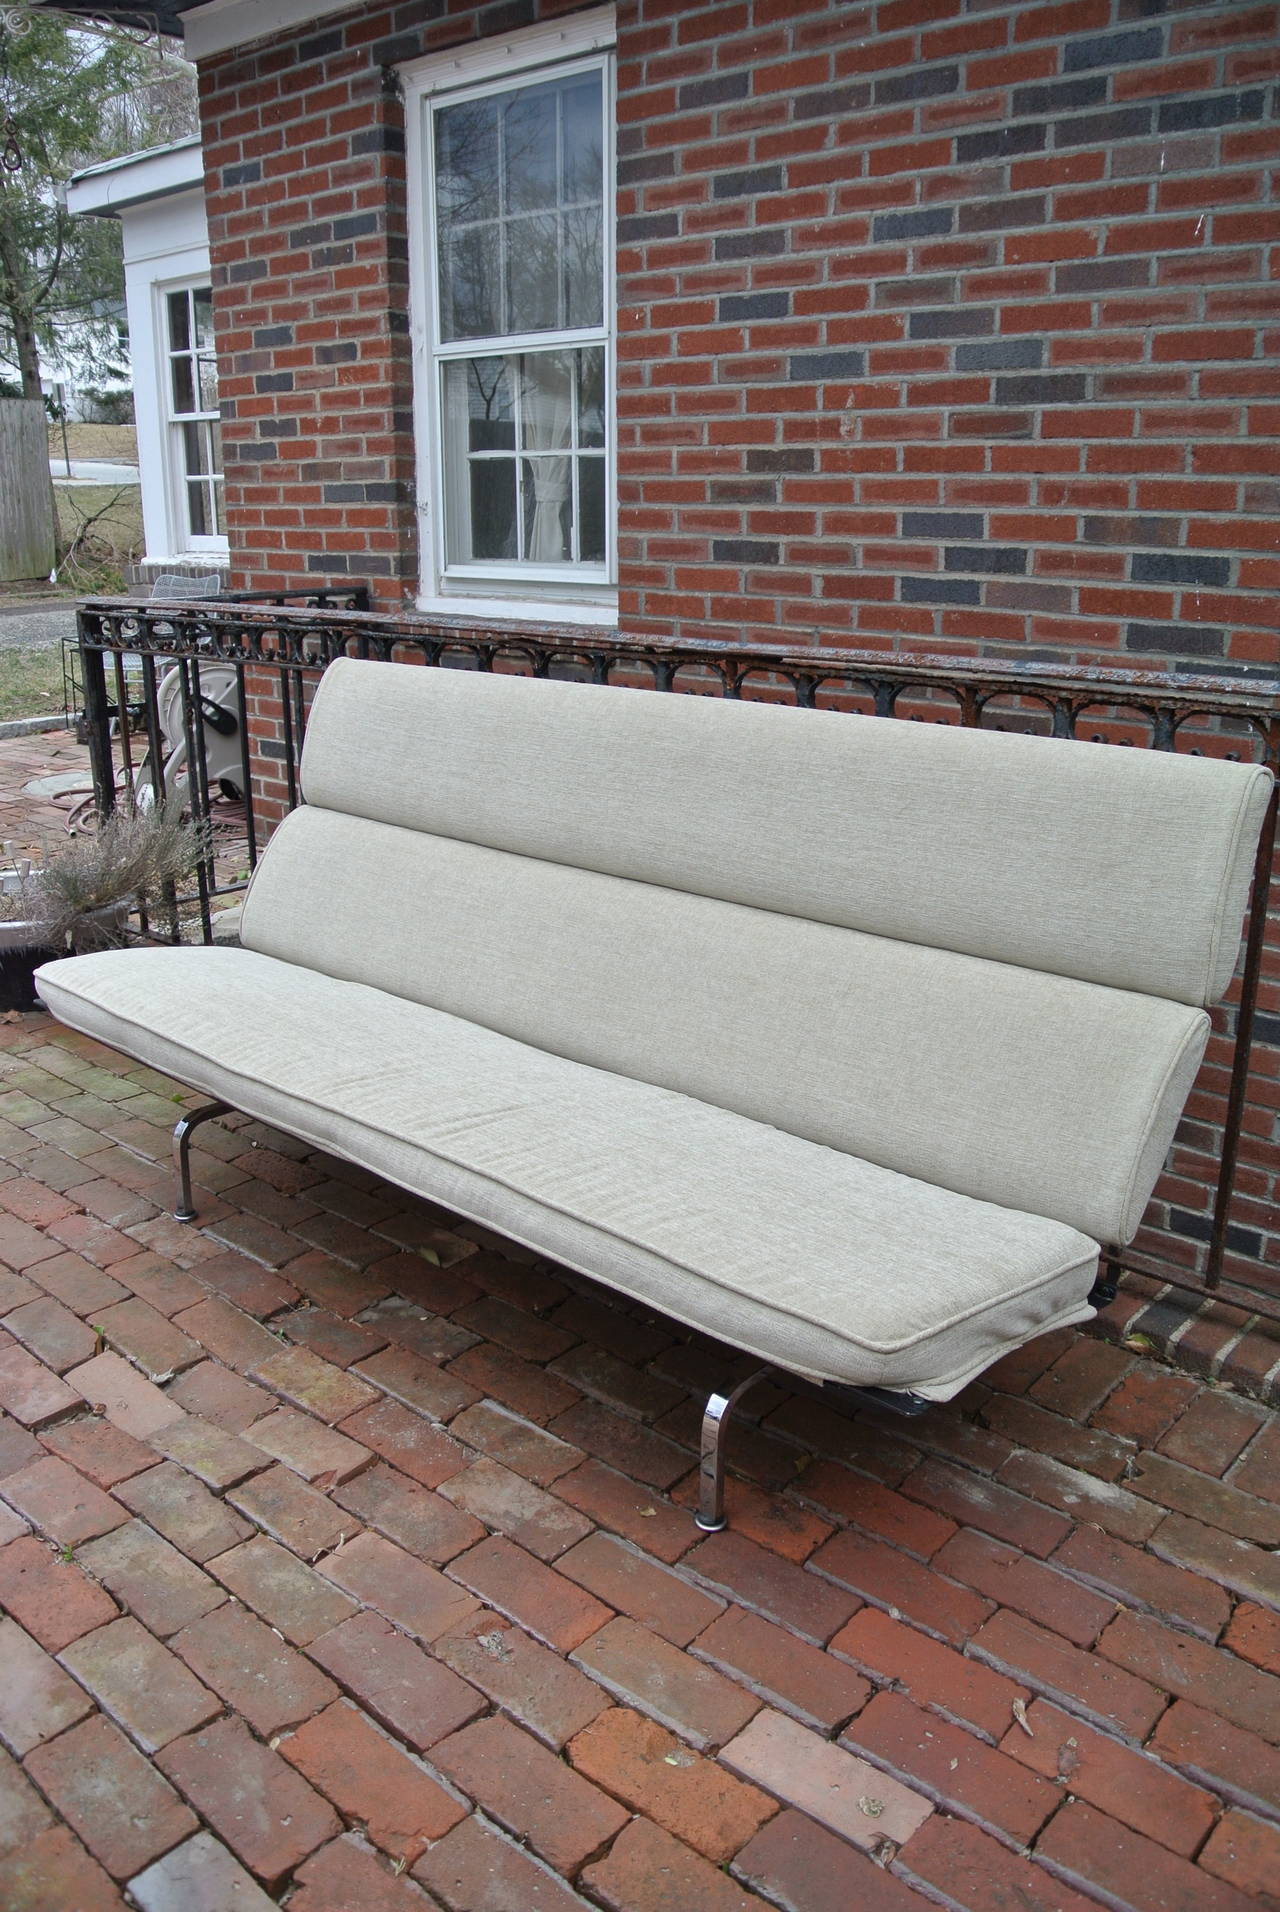 Charles Eames Compact Sofa for Herman Miller In Excellent Condition For Sale In Morristown, NJ